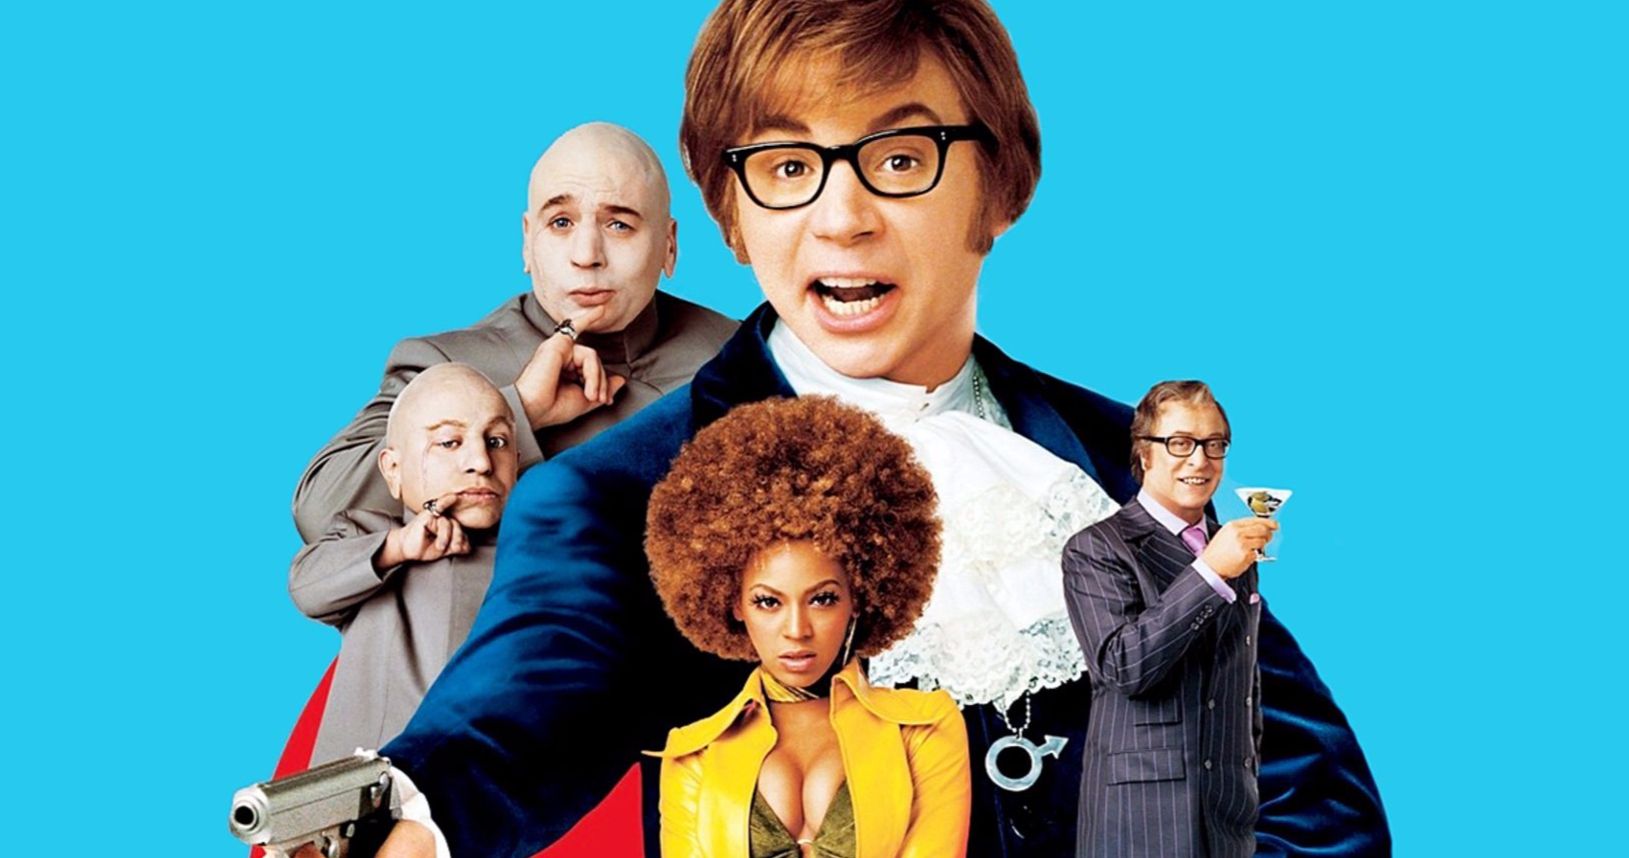 Austin Powers 4 Update Arrives from Director Jay Roach [Exclusive]